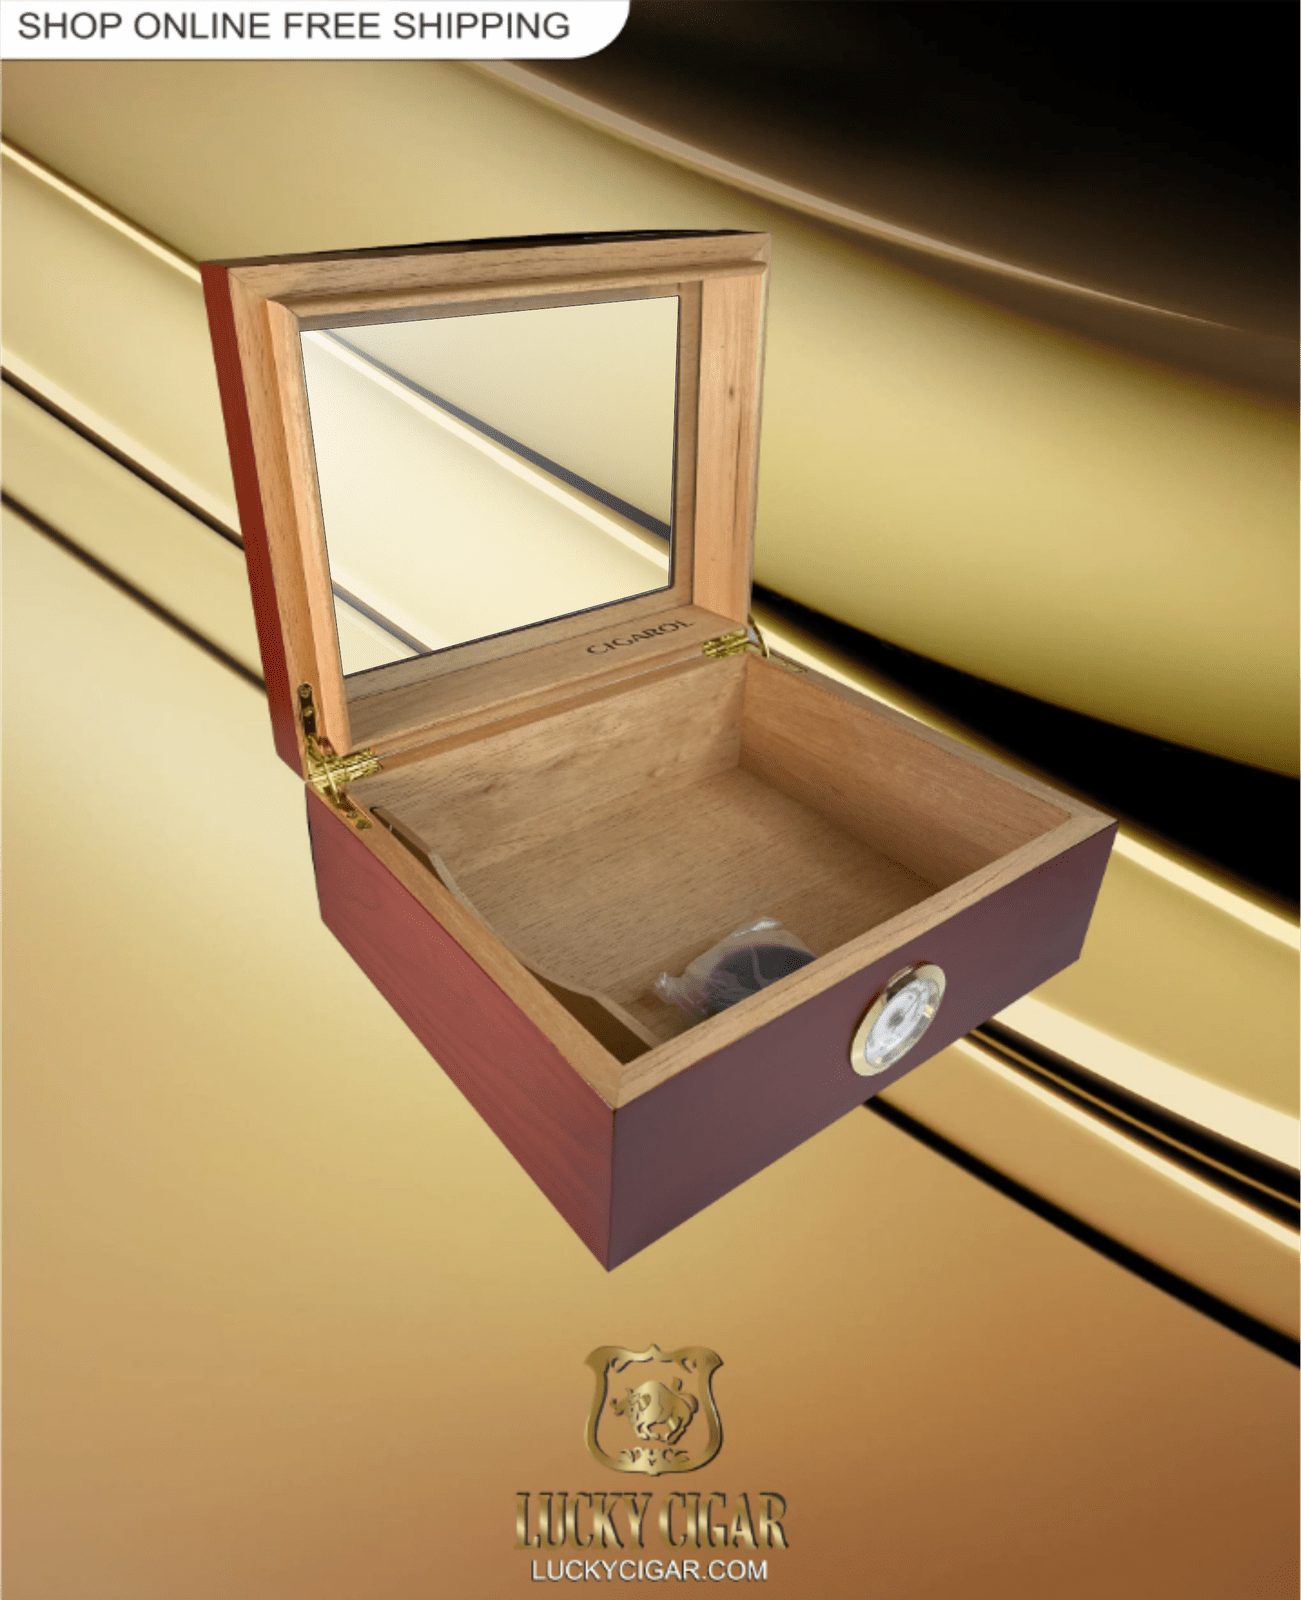 Cigar Lifestyle Accessories: Desk Humidor with Glass Top in Red Wood